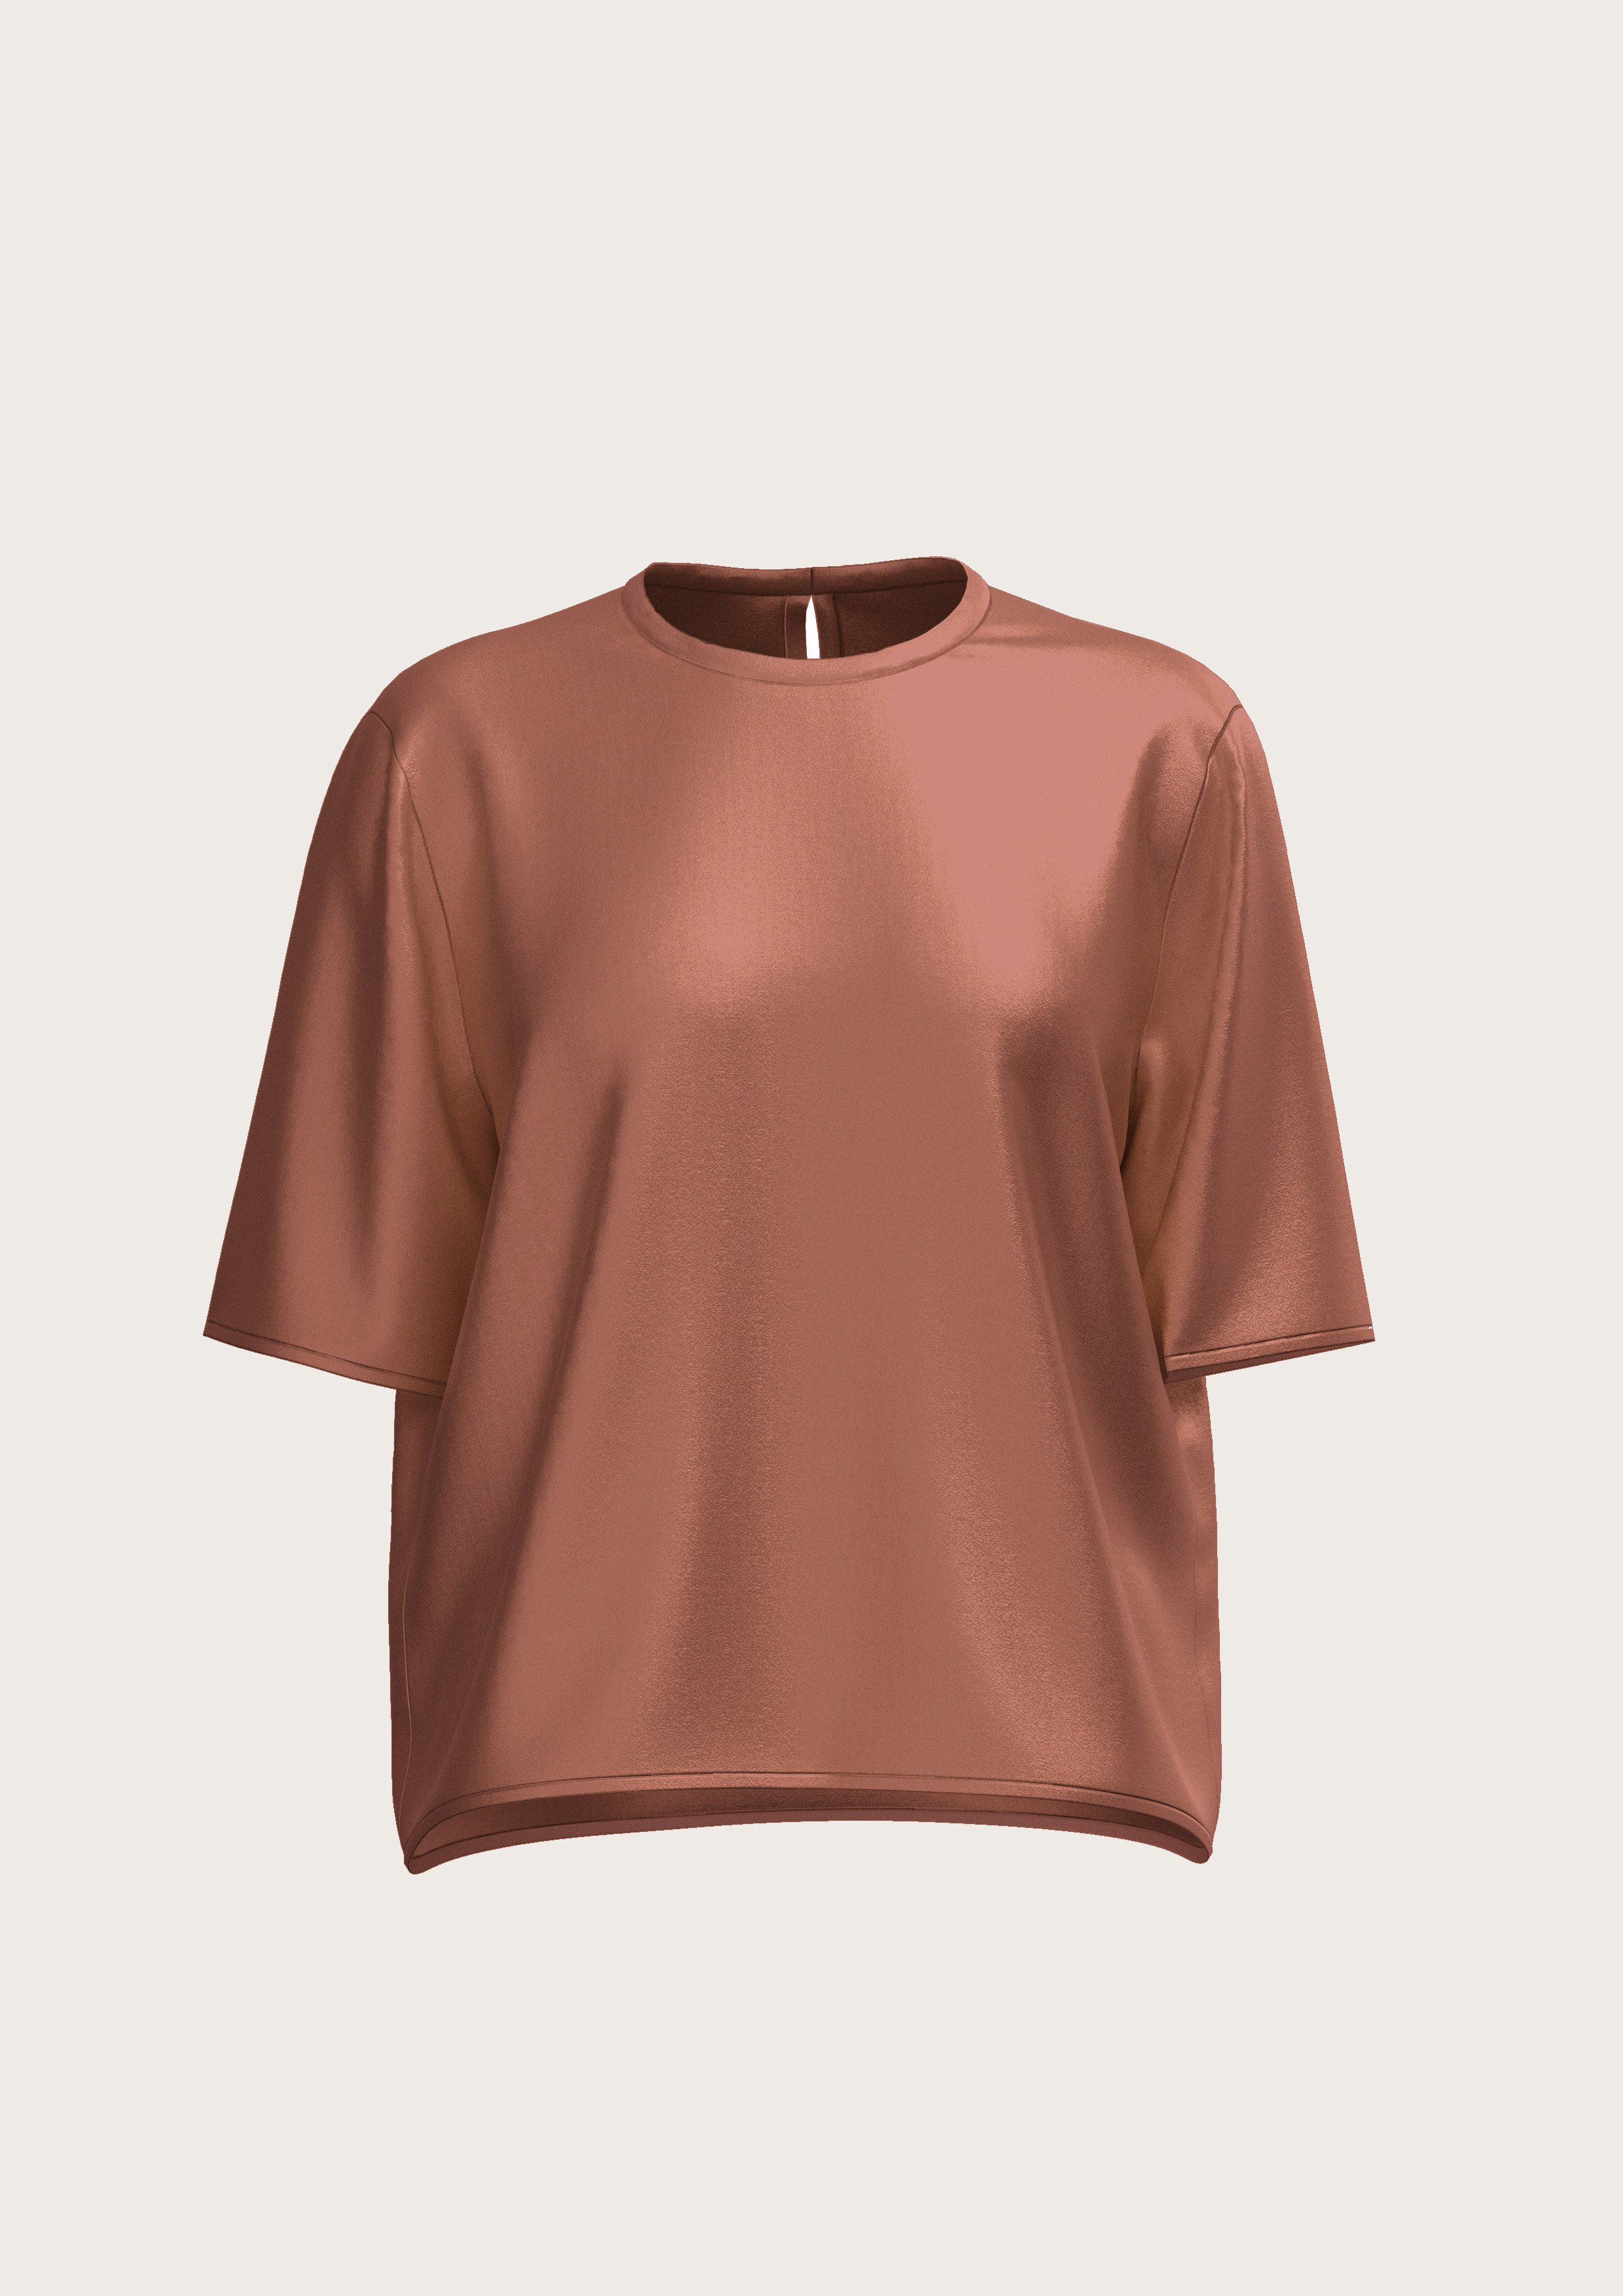 T-Shirt in rosewood